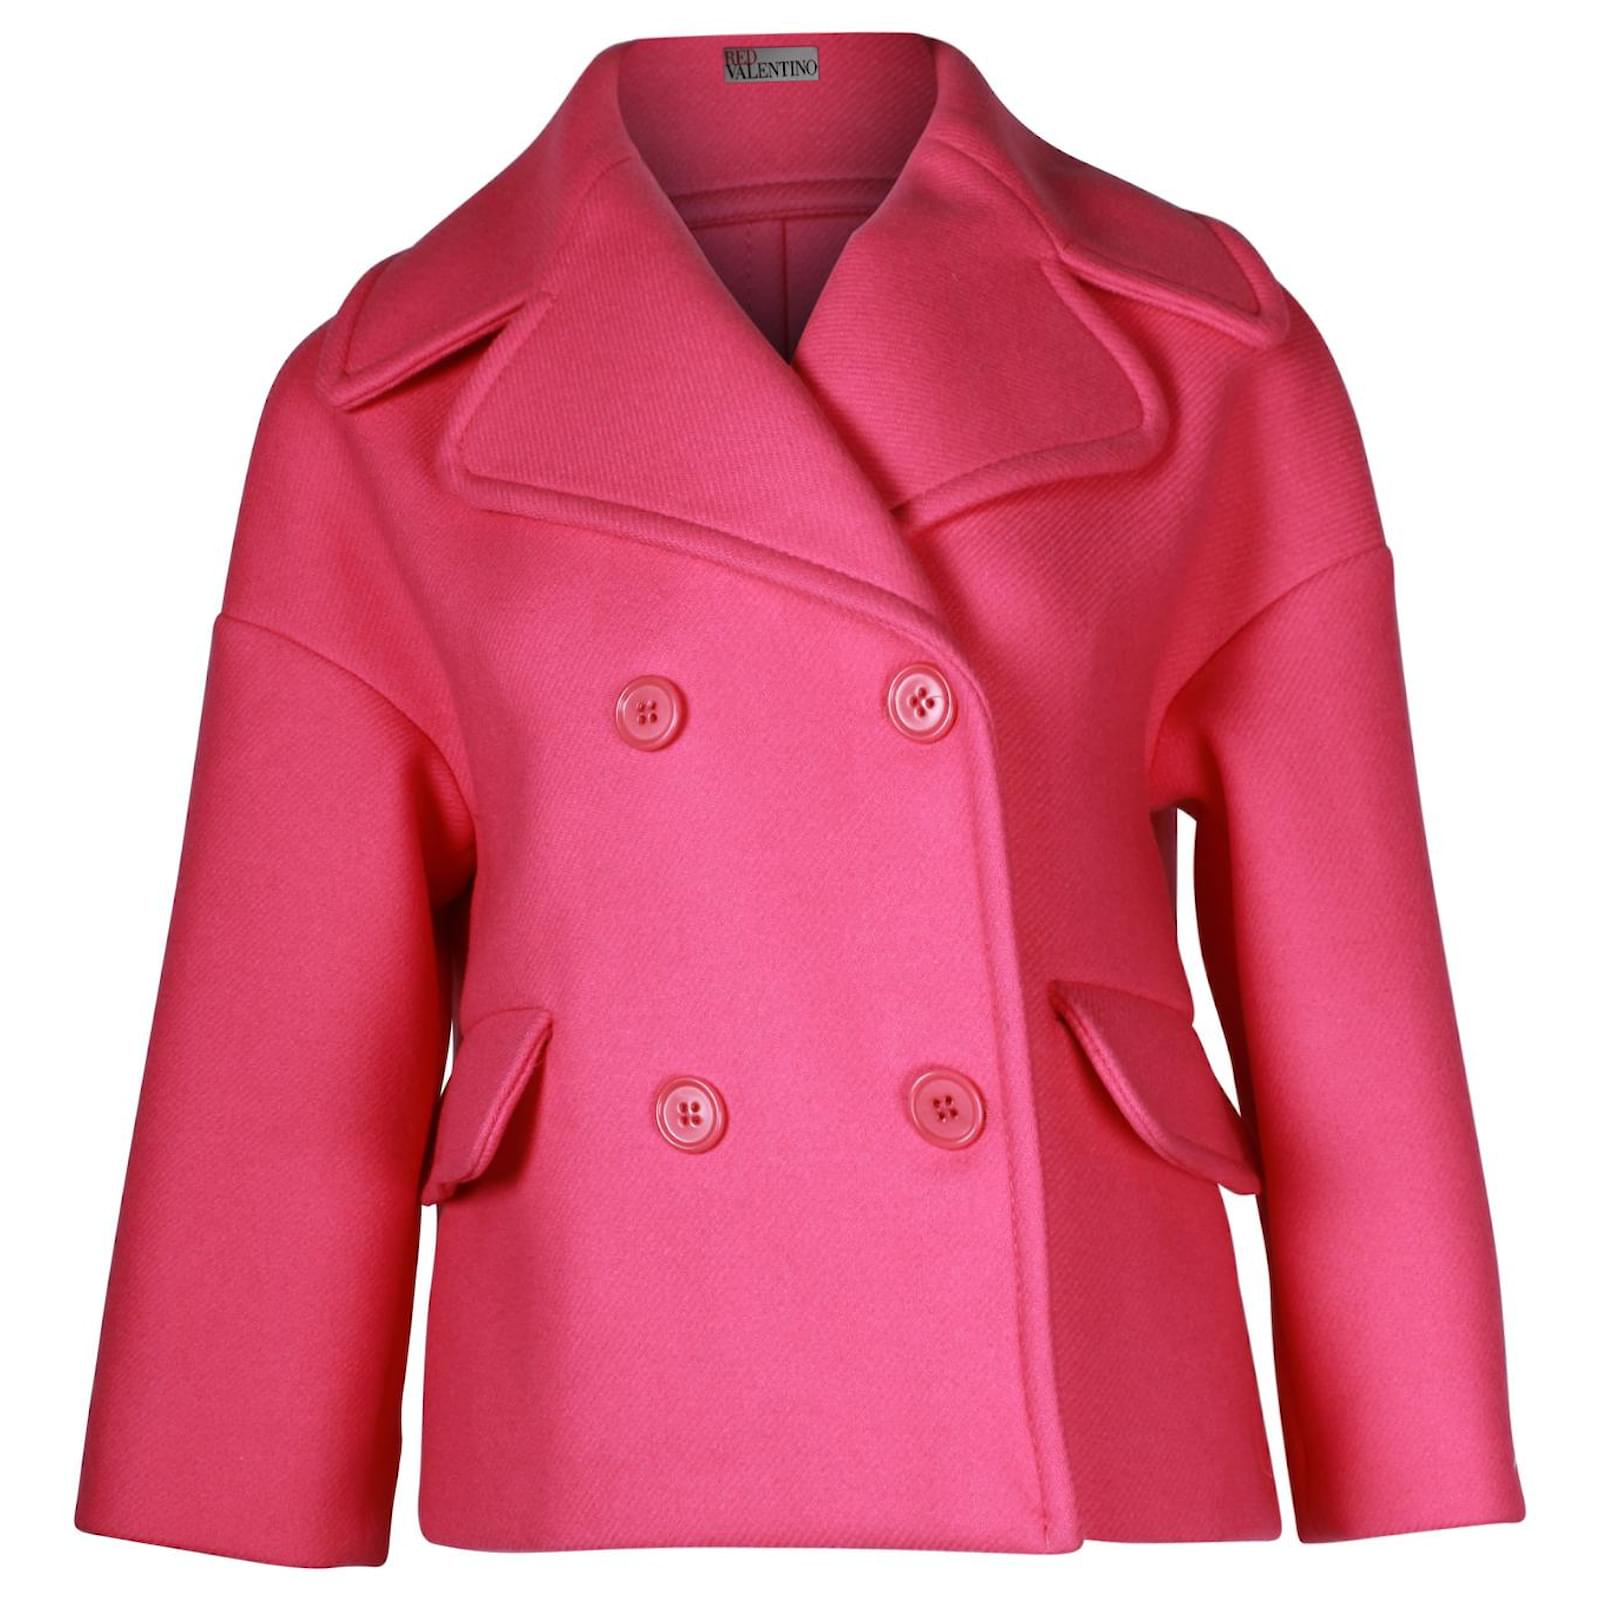 Red Valentino Drop Shoulder Double-Breasted Jacket in Pink Wool